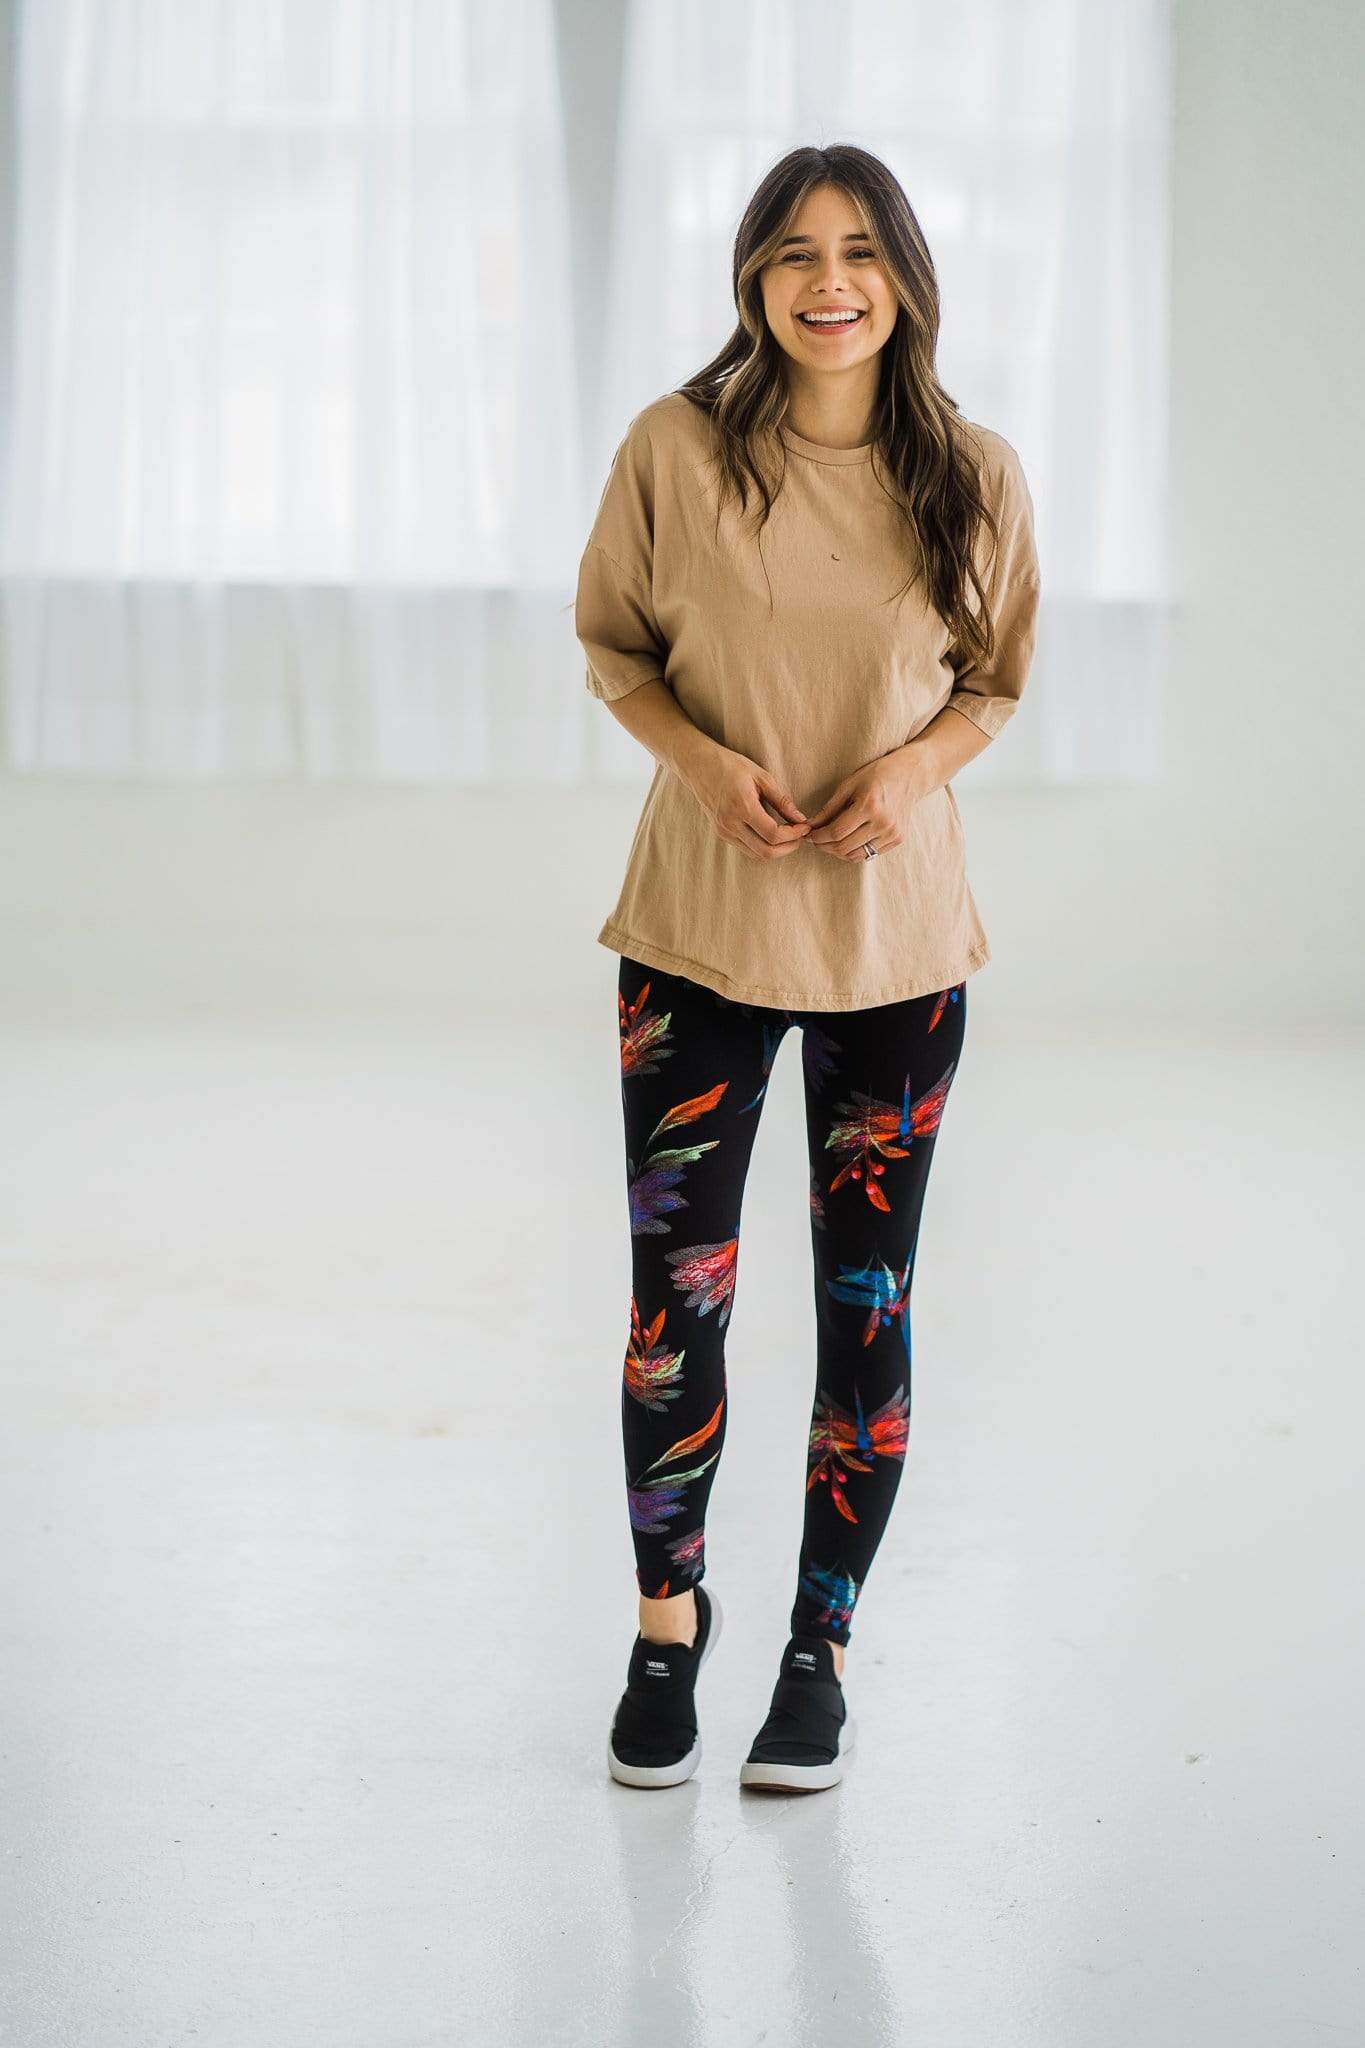 OxLaLa Leggings Dragonfly Paradise with Yoga Band Dragonfly Paradise with Yoga Band - Soft, comfortable leggings. Beautiful designs and patterns. 